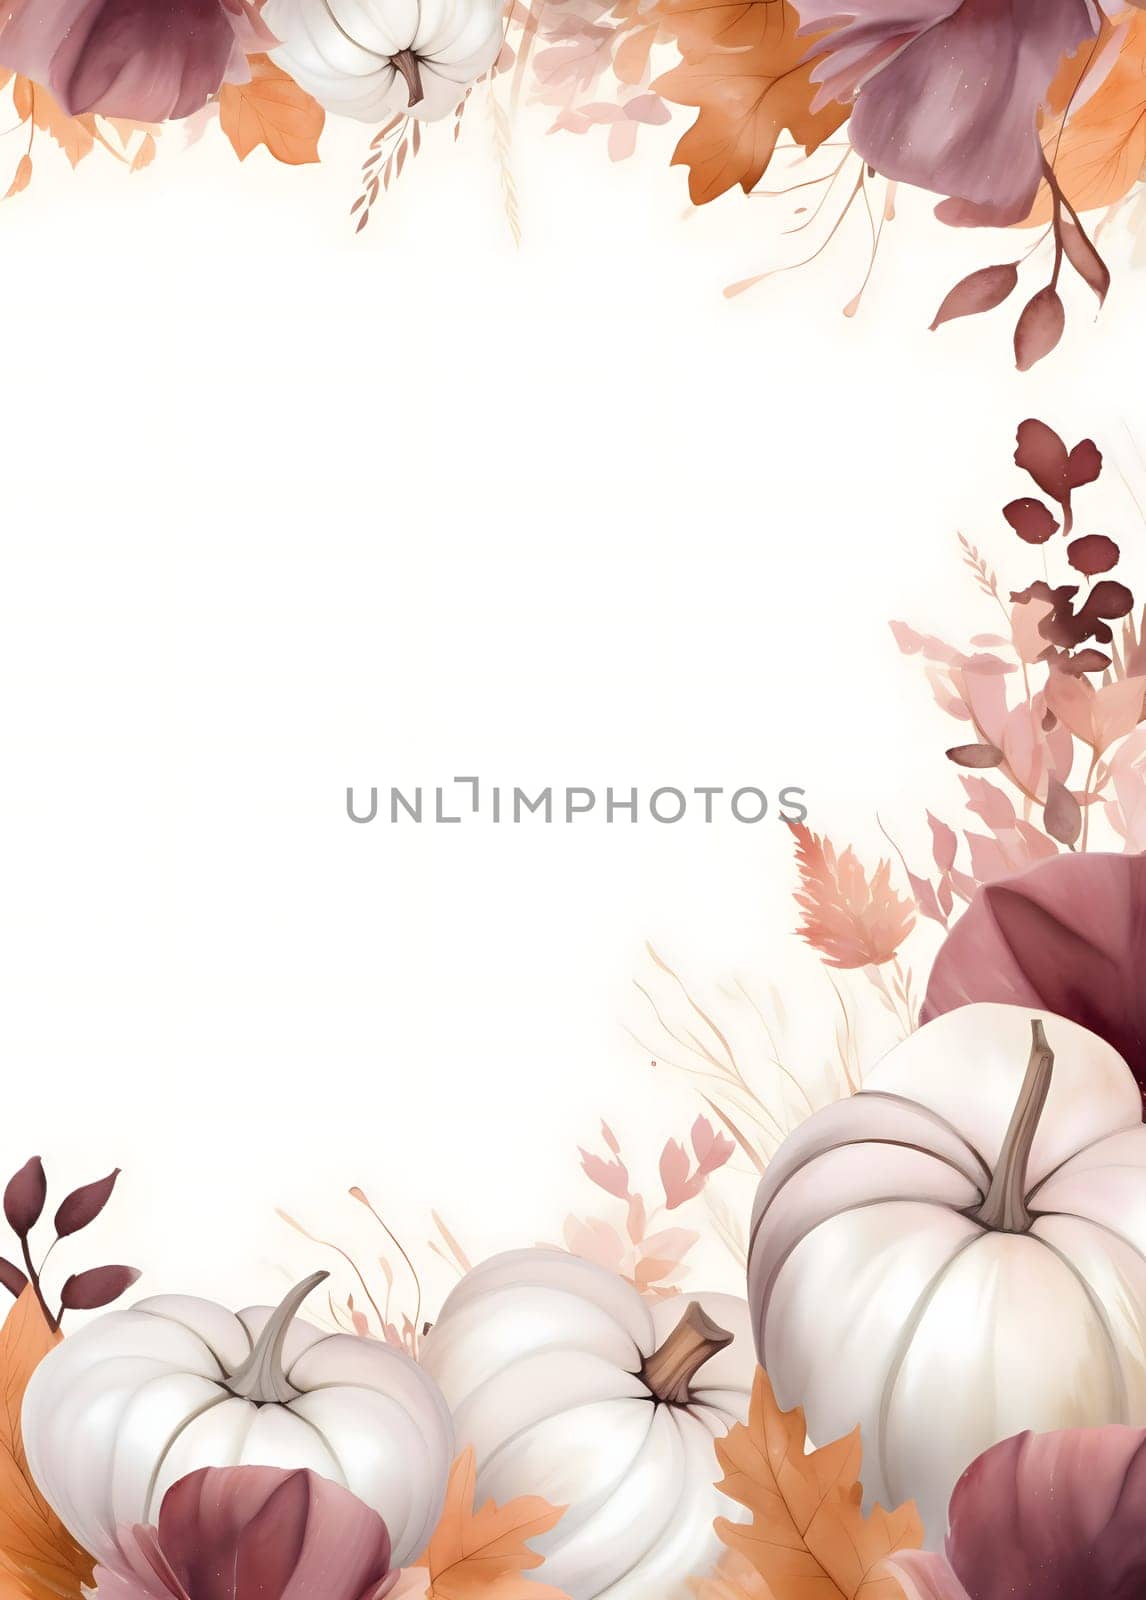 A frame embellished with pumpkins, flowers and leaves against a light background forms an elegant and visually appealing composition.